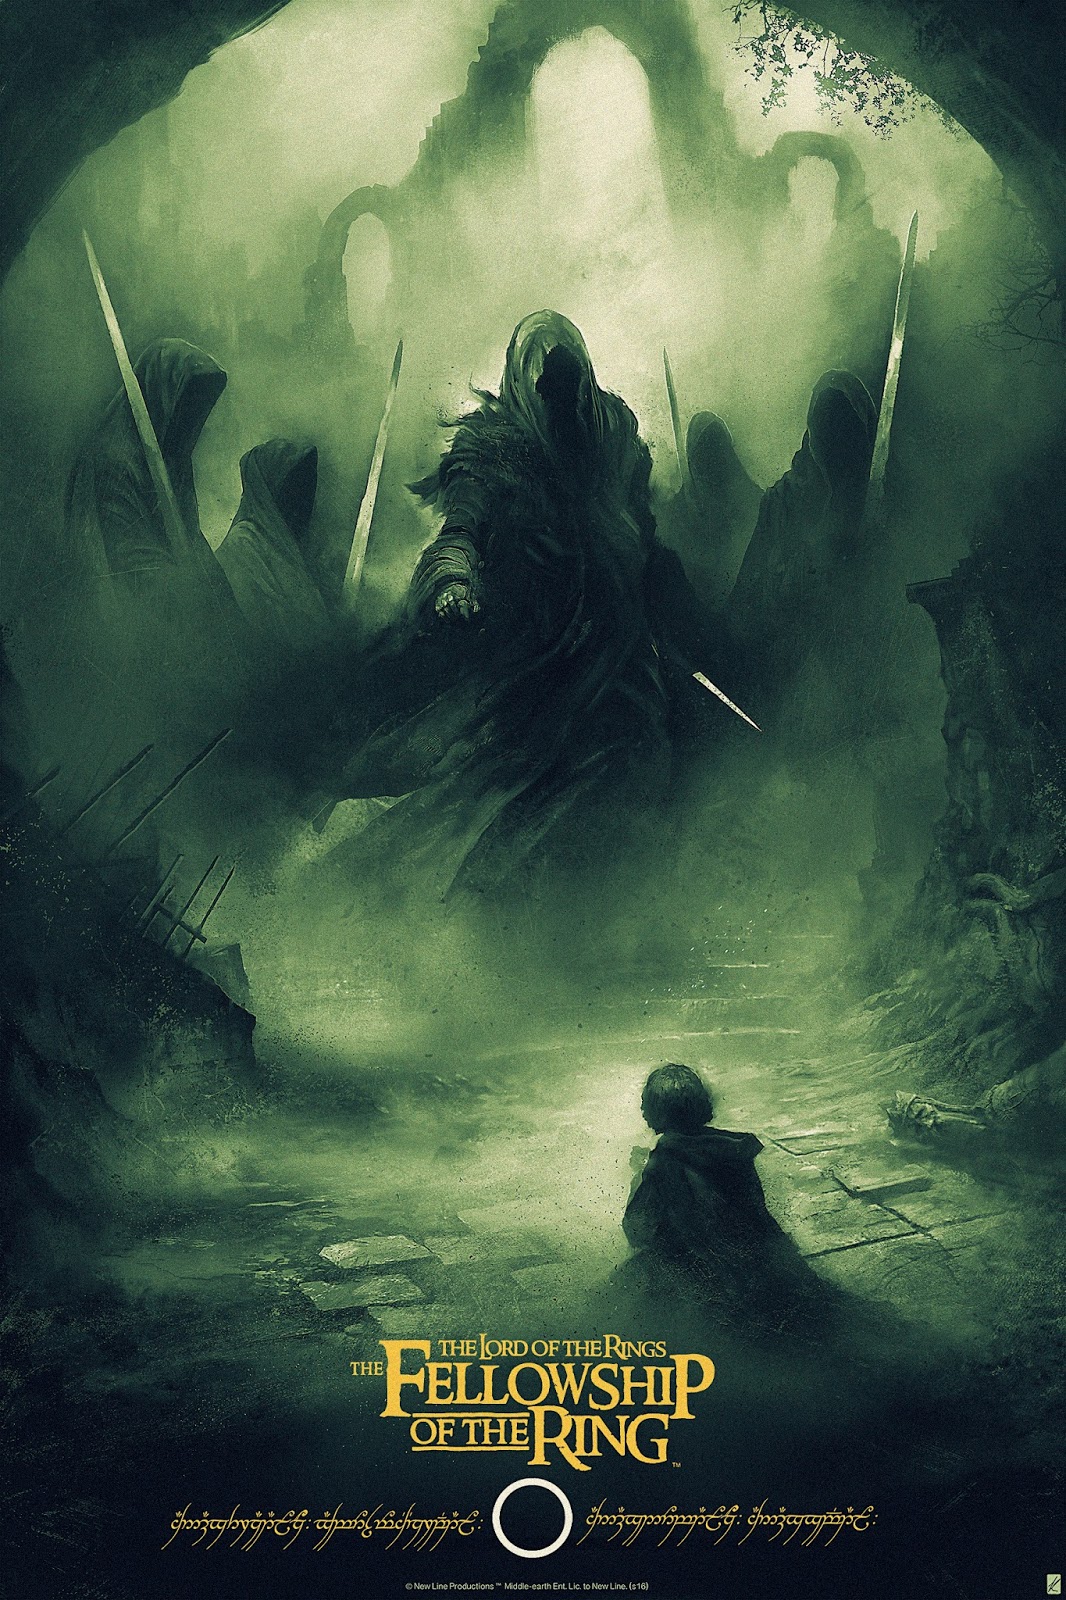 Lord of the Rings: The Fellowship of the Ring Fine Art Print by Darren Tan